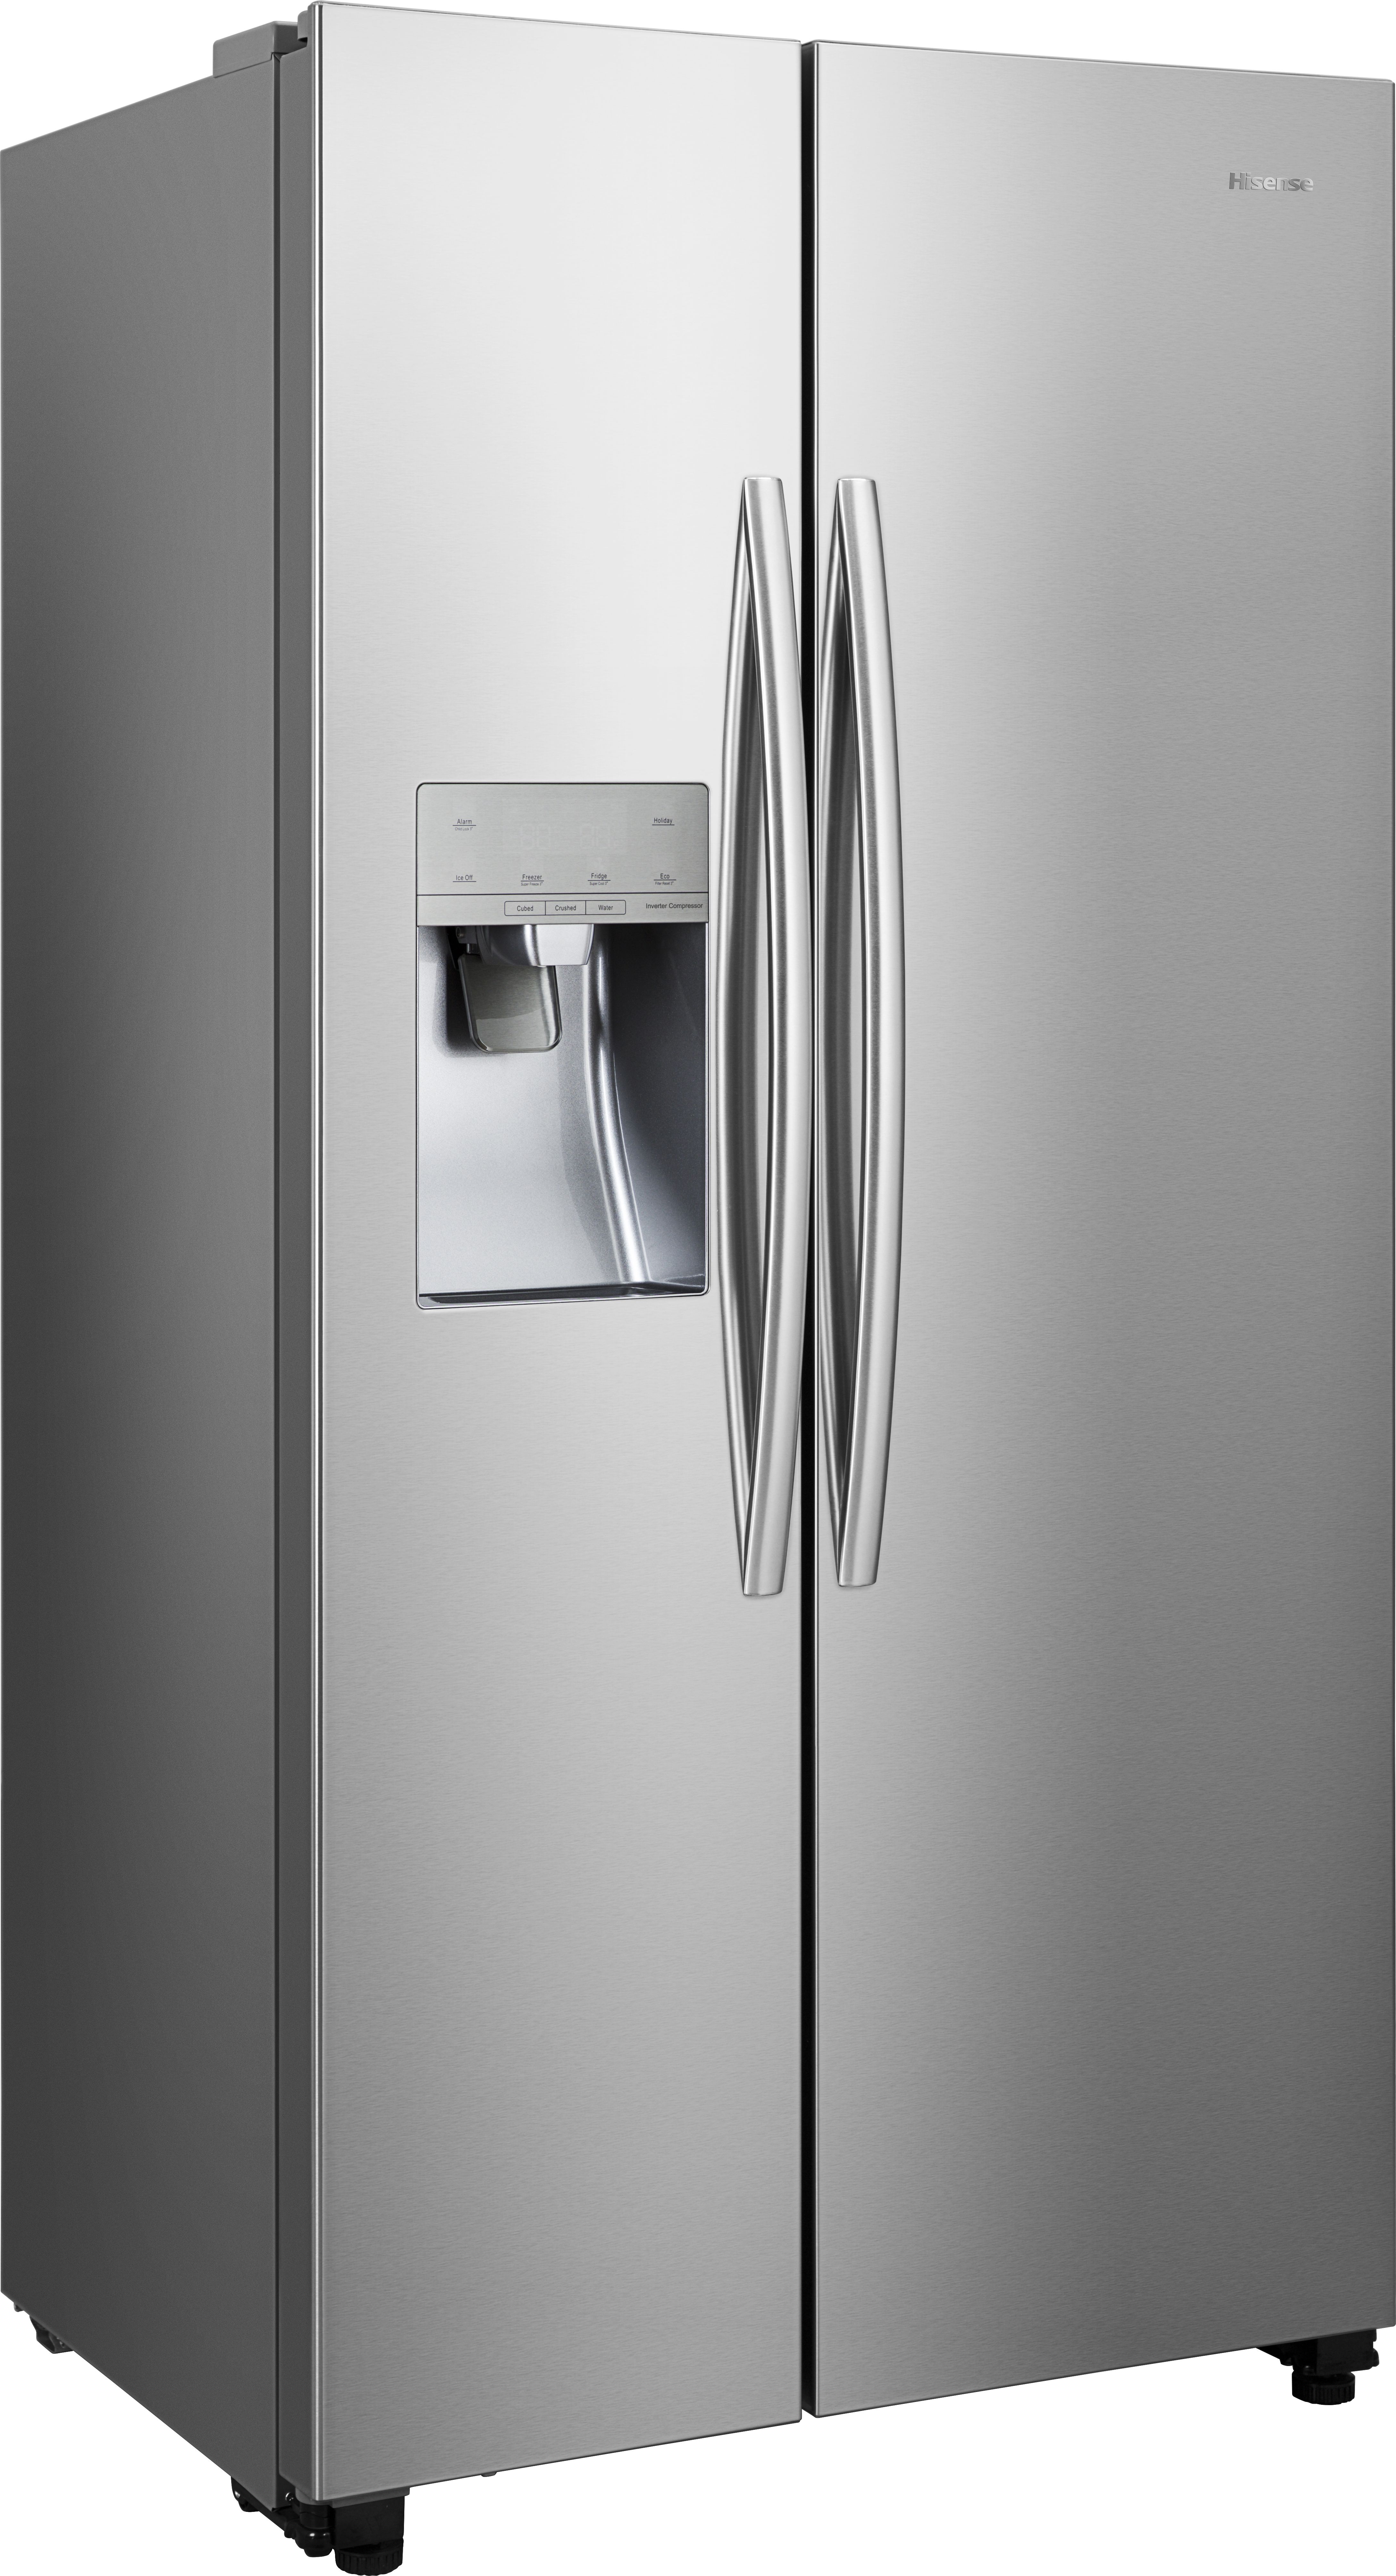 Hisense RS694N4ICE Total No Frost American Fridge Freezer - Stainless Steel - E Rated, Stainless Steel